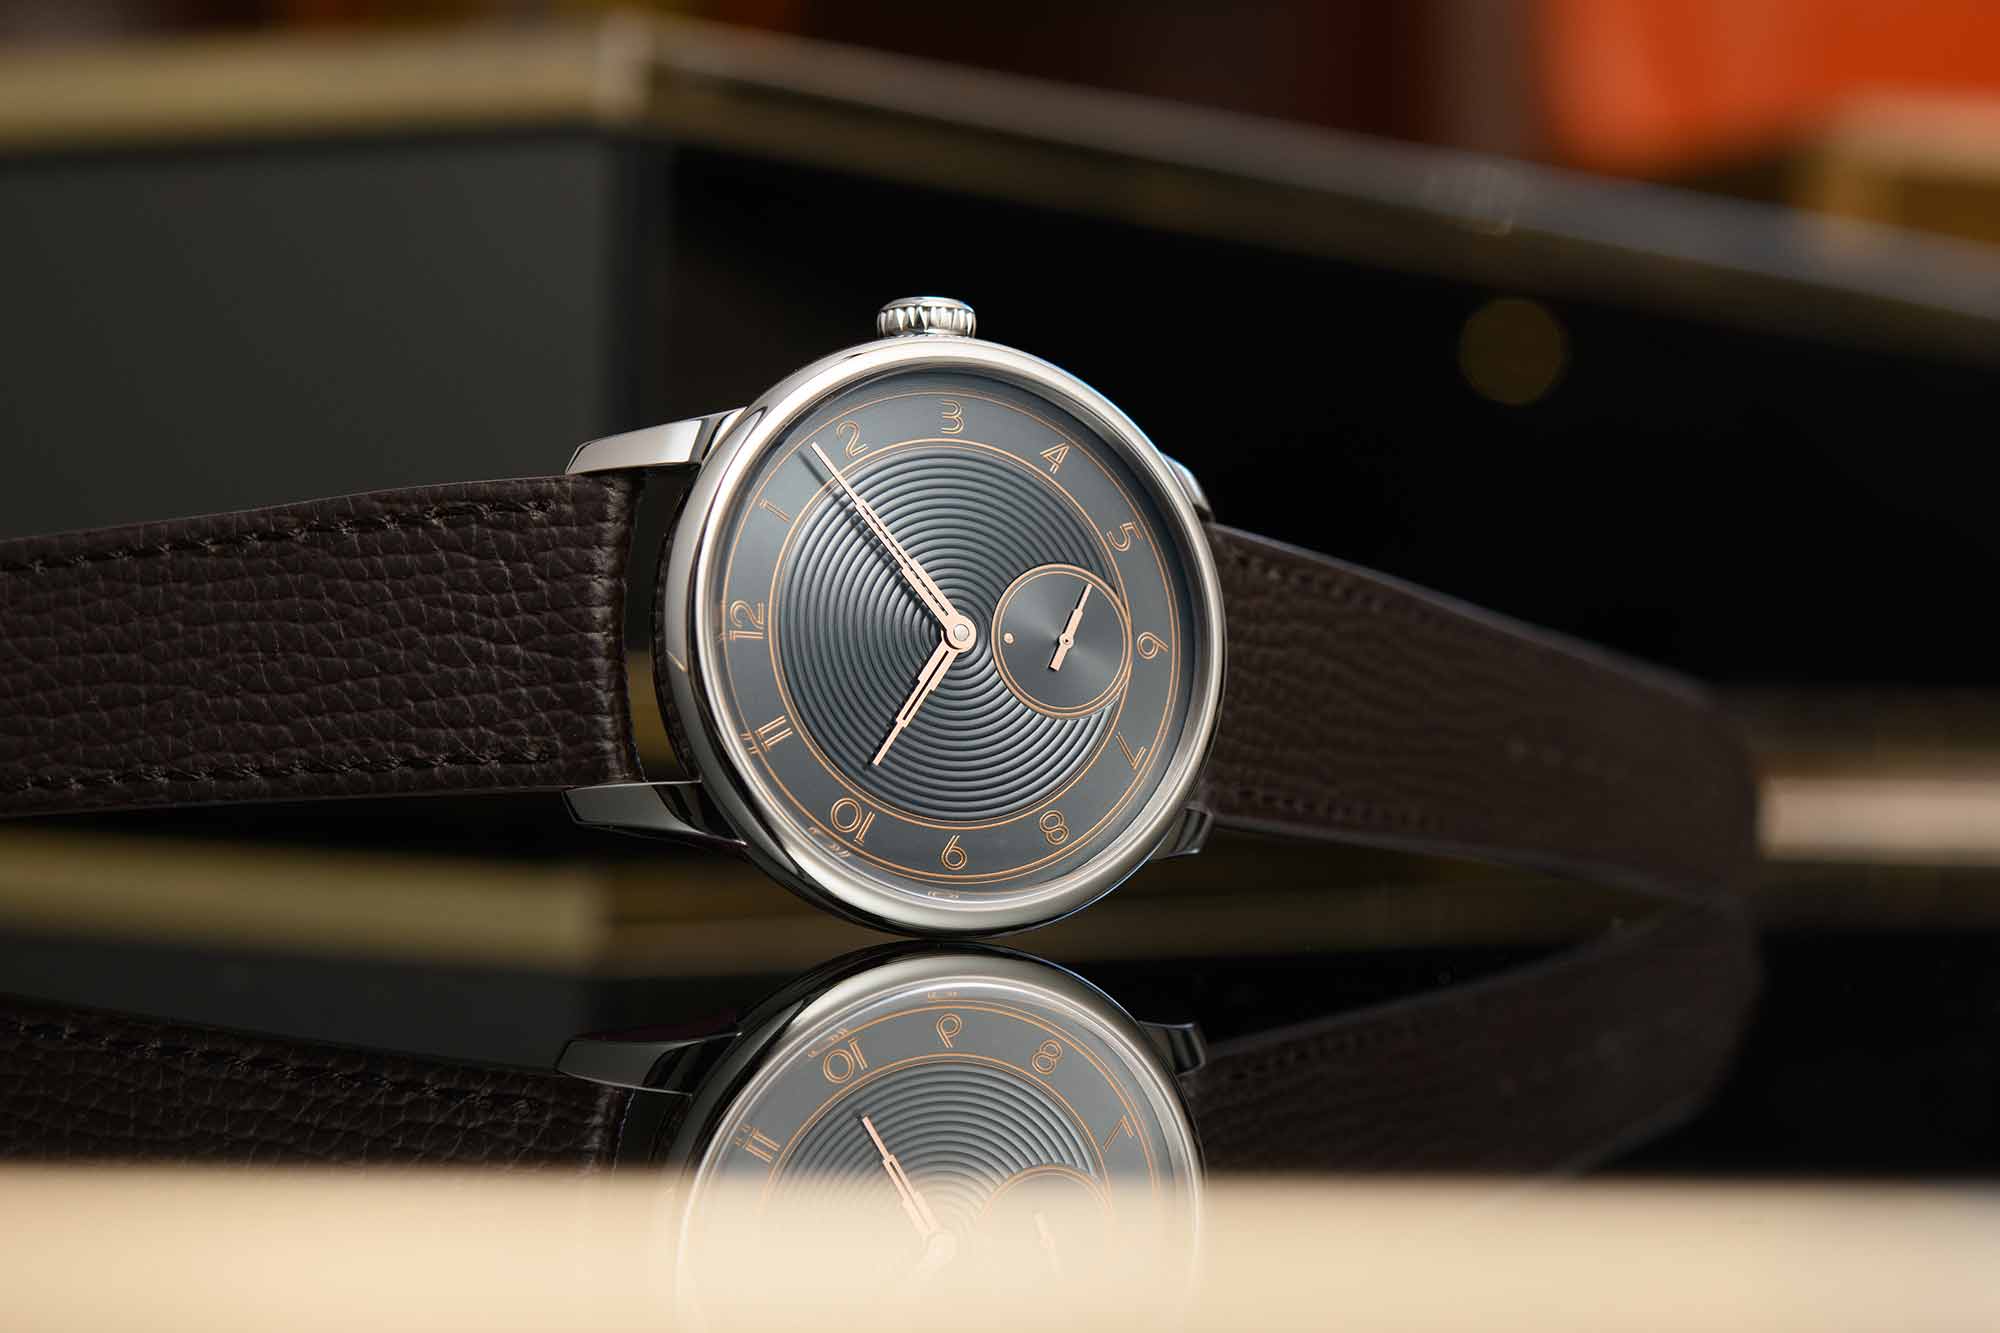 Louis Erard and The Horophile Collaborate on a Sleek Art Deco Inspired Limited Edition